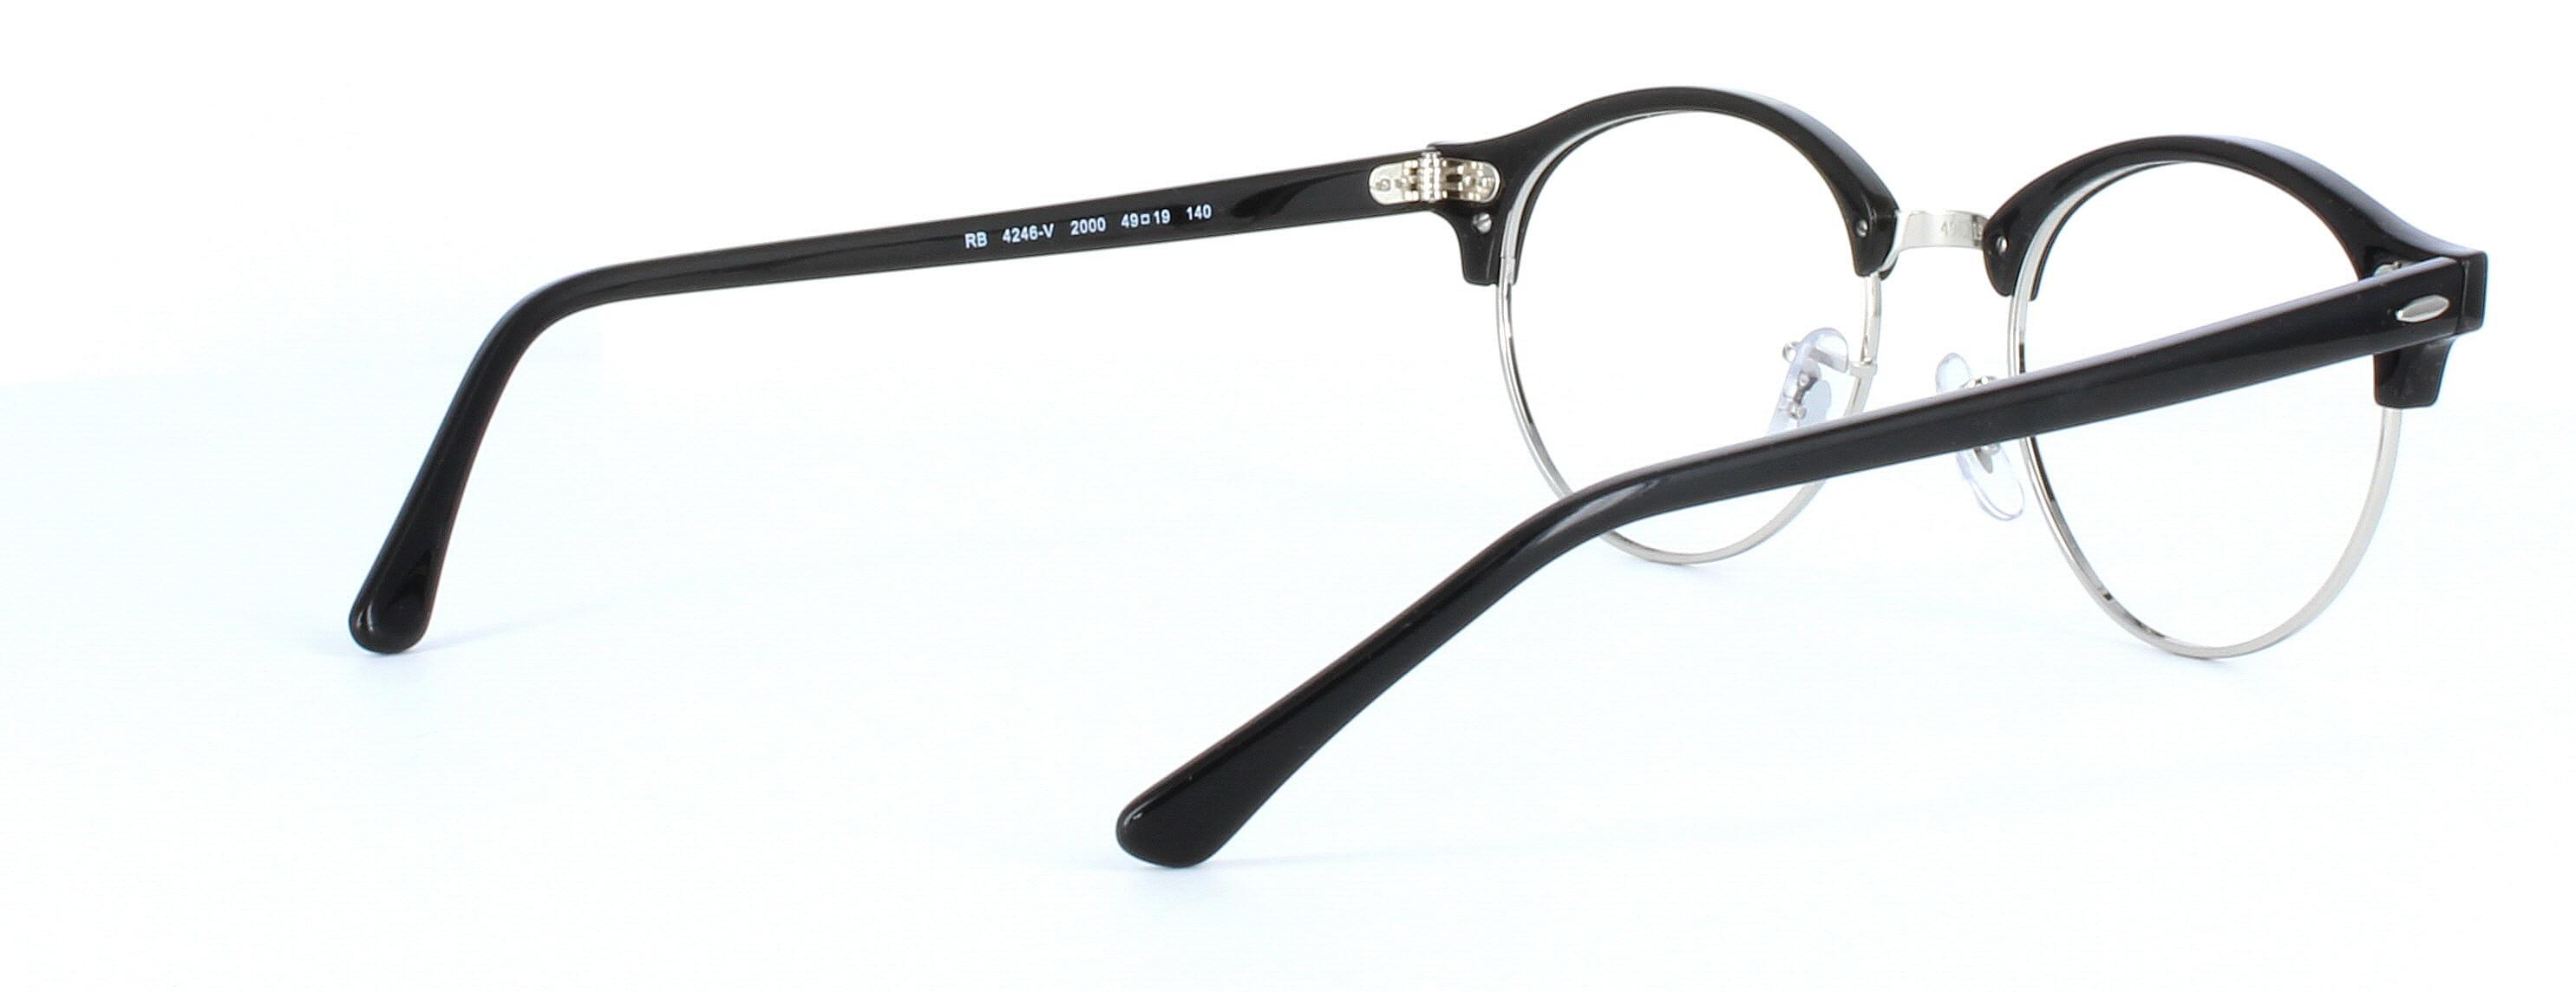 Ray Ban 4246 - Women's round shaped plastic and metal frame by Ray Ban - Black & silver - image view 4